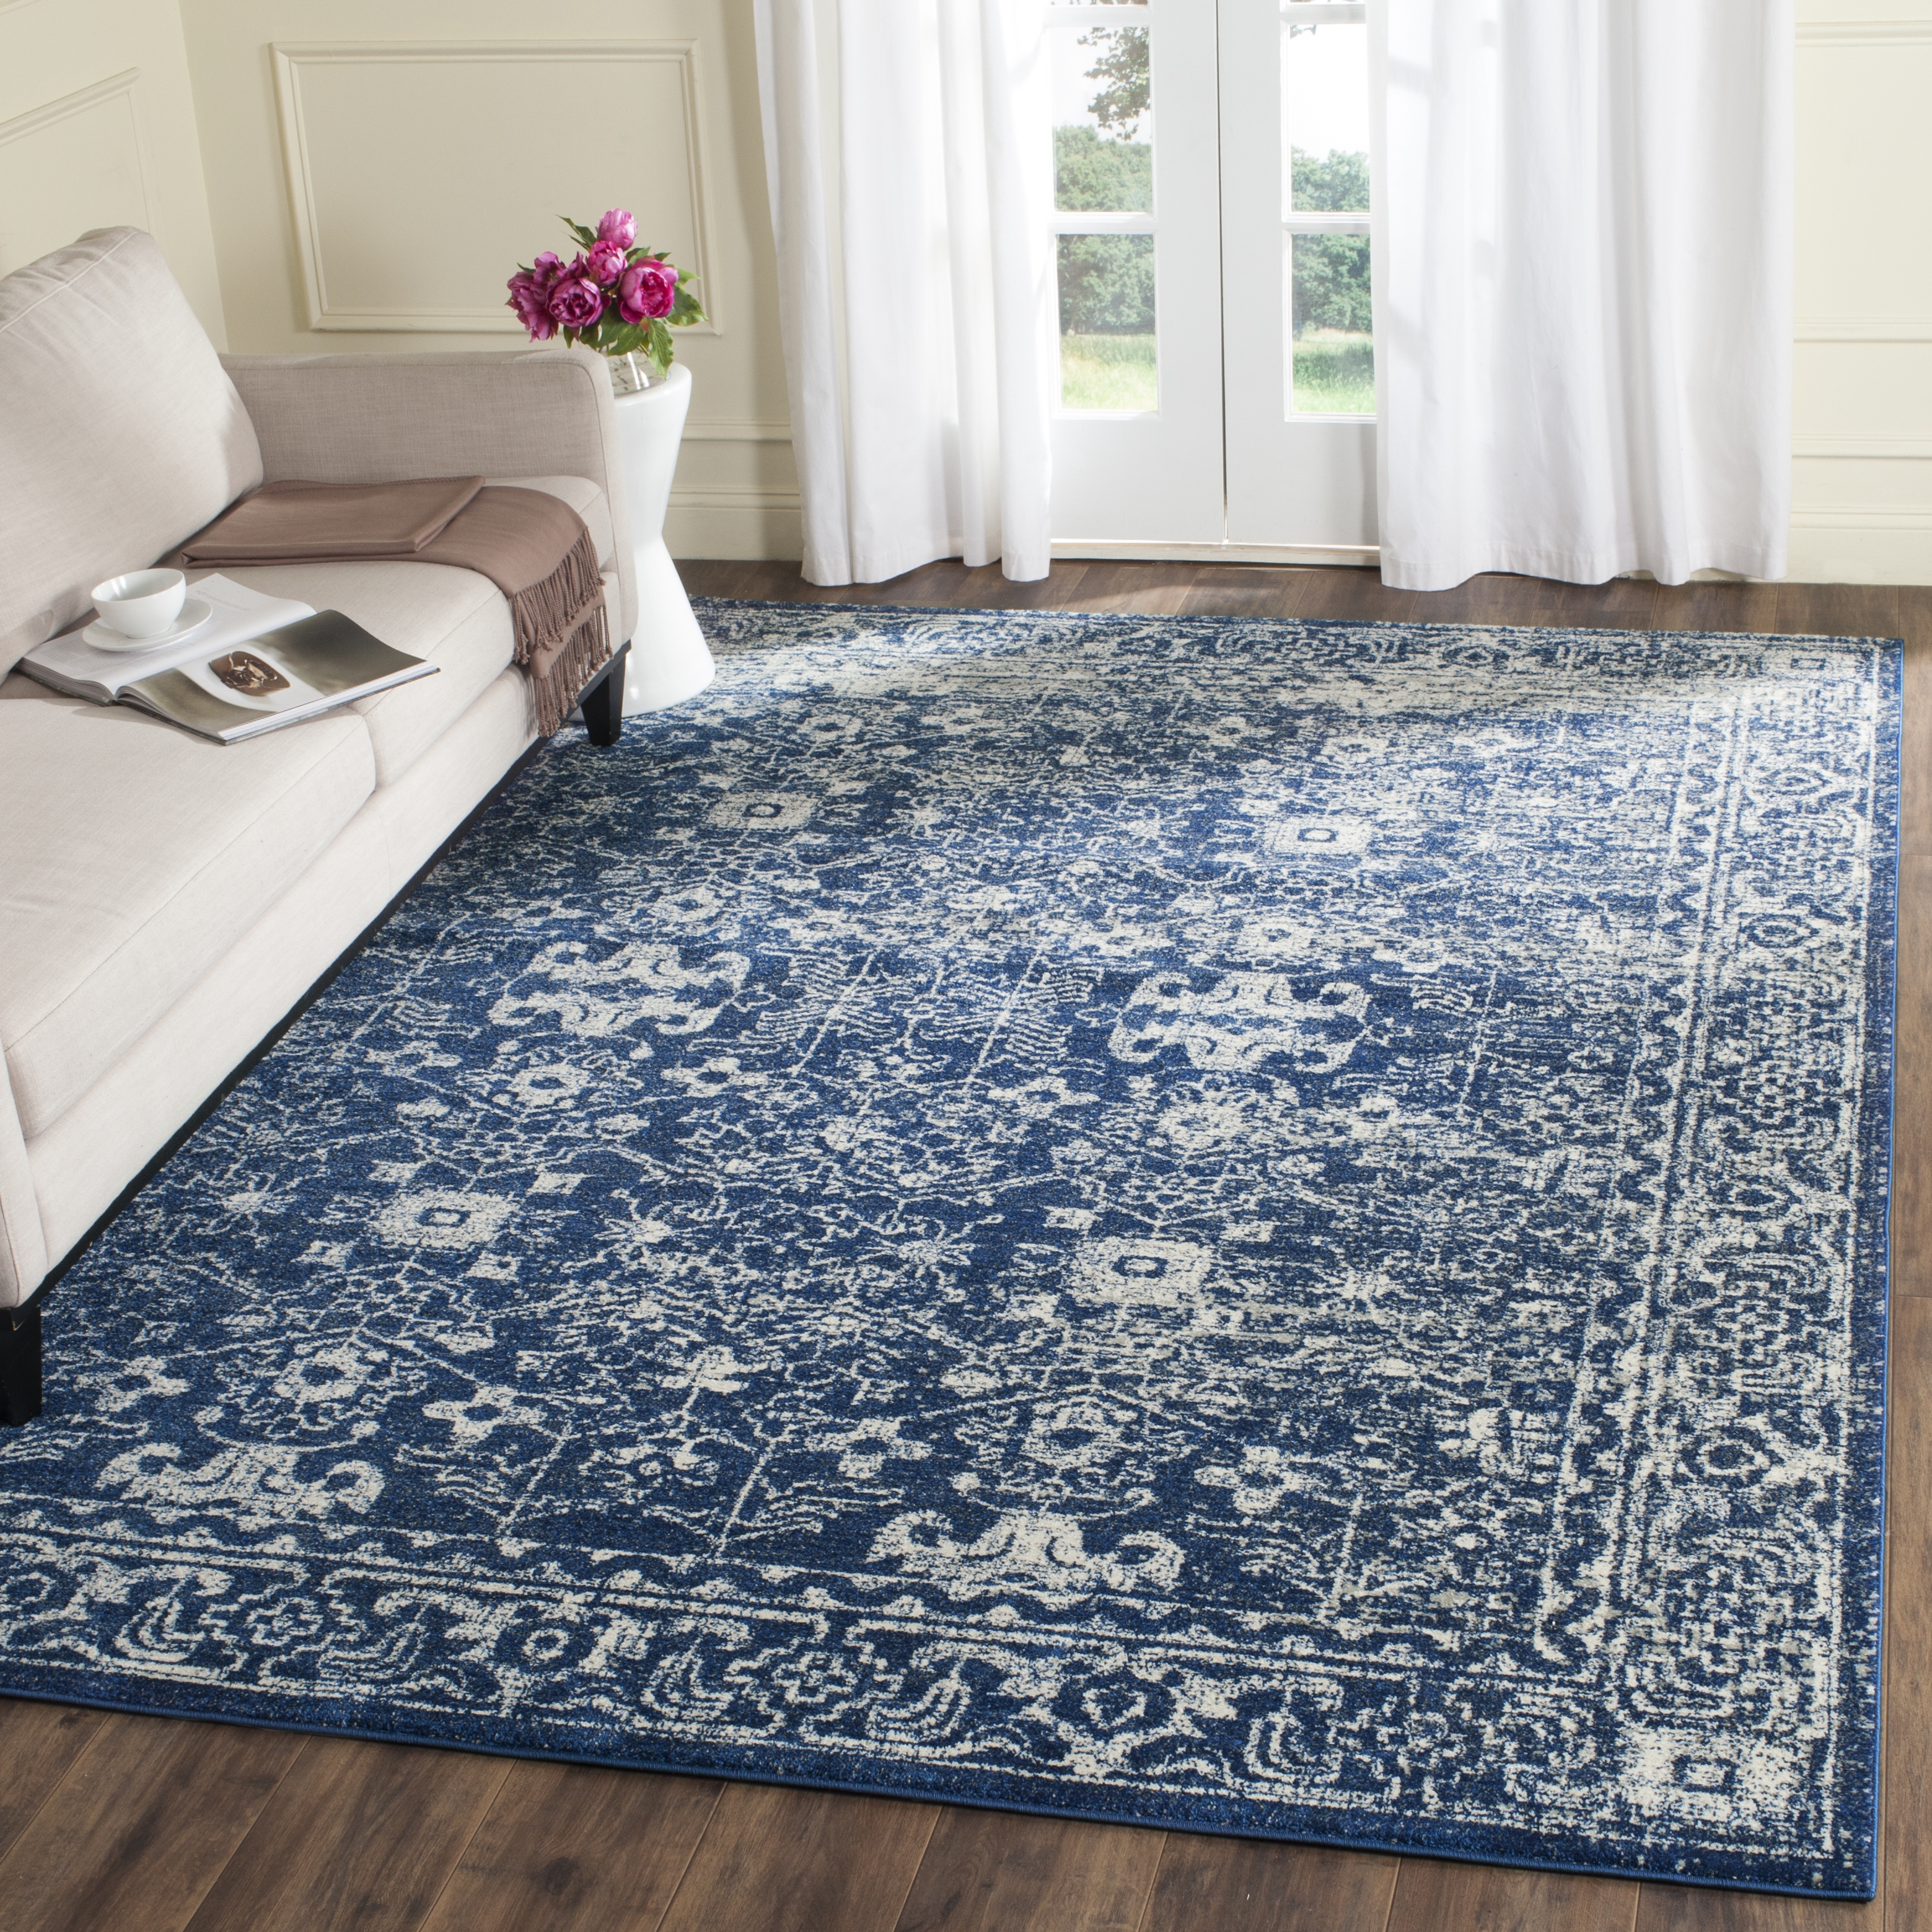 Arlo Home Woven Area Rug, EVK270A, Navy/Ivory,  8' X 10' - Image 1